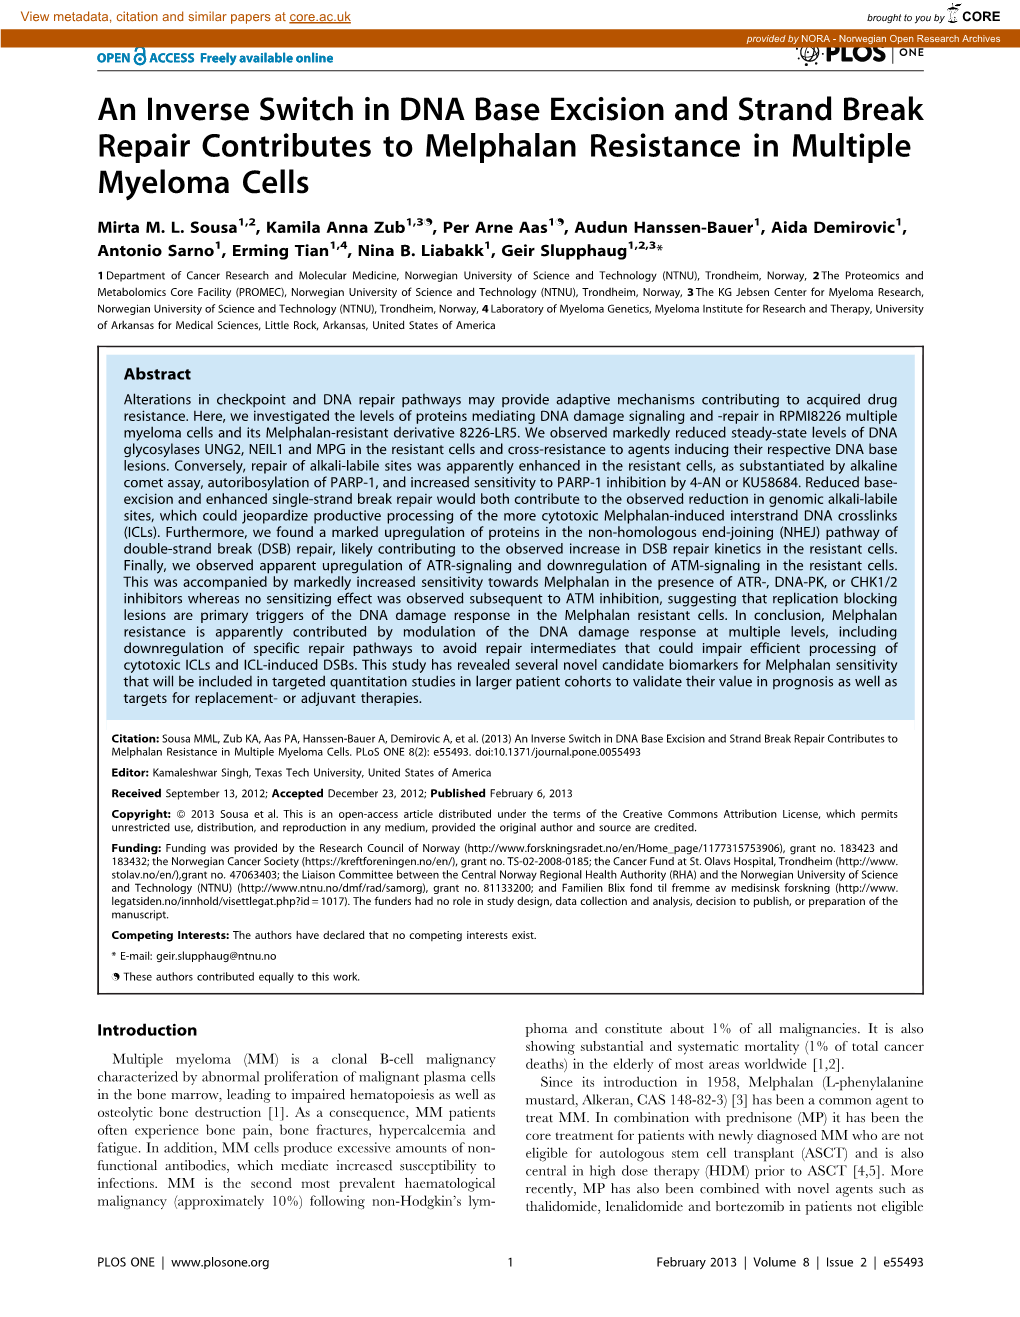 An Inverse Switch in DNA Base Excision and Strand Break Repair Contributes to Melphalan Resistance in Multiple Myeloma Cells